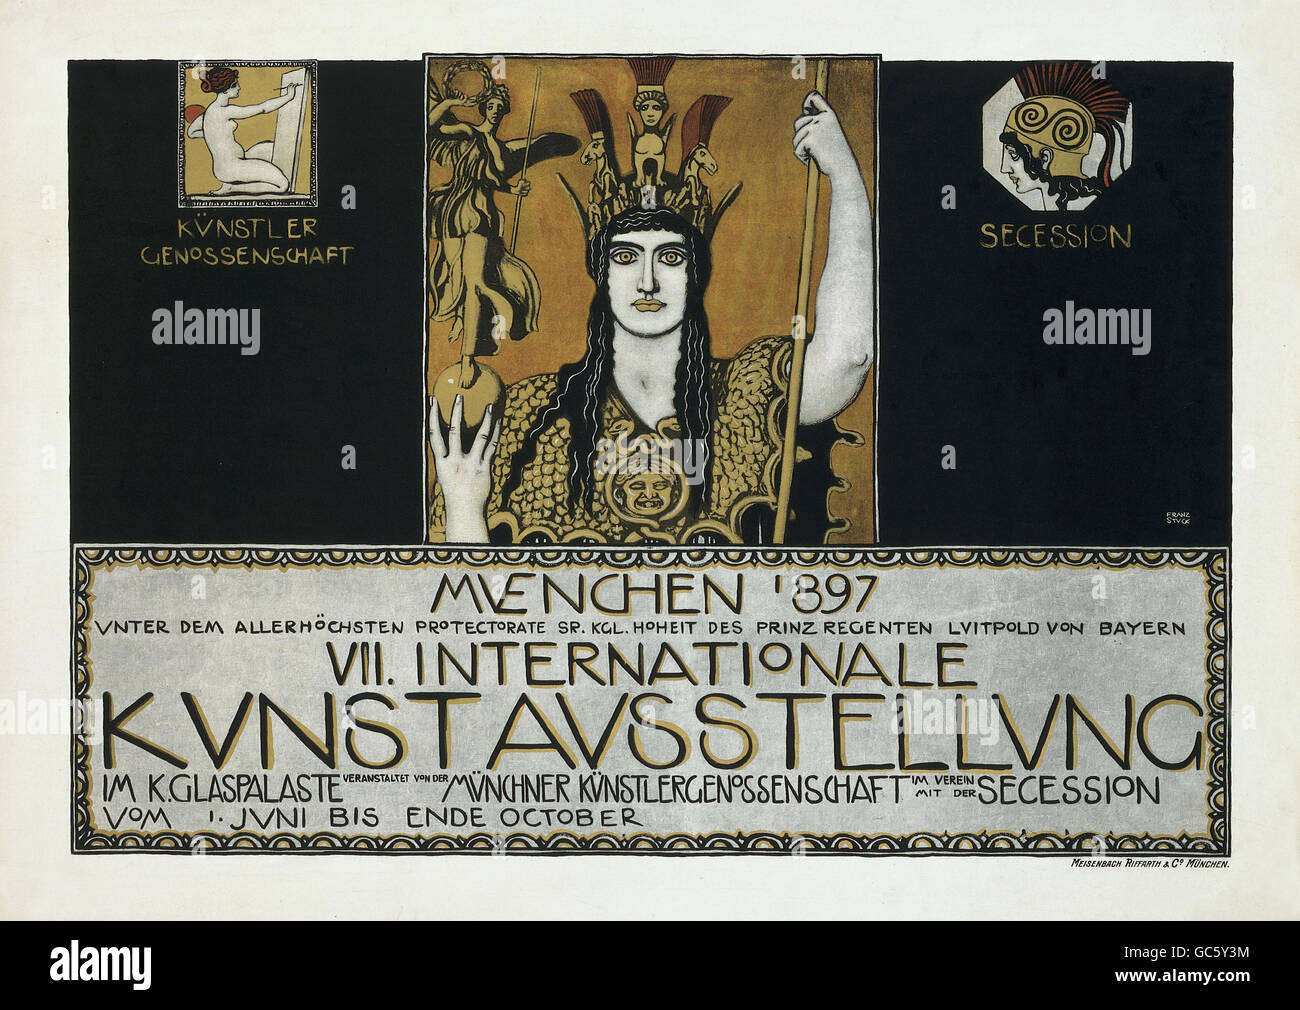 exhibitions, fine arts, 7th International Art Exhibition, poster by Franz von Stuck (1863 - 1928), autotype, print: Meisenbach Riffarth & Co., Munich, 60 x 87.5 cm, Munich City Museum, 1897, Additional-Rights-Clearences-Not Available Stock Photo